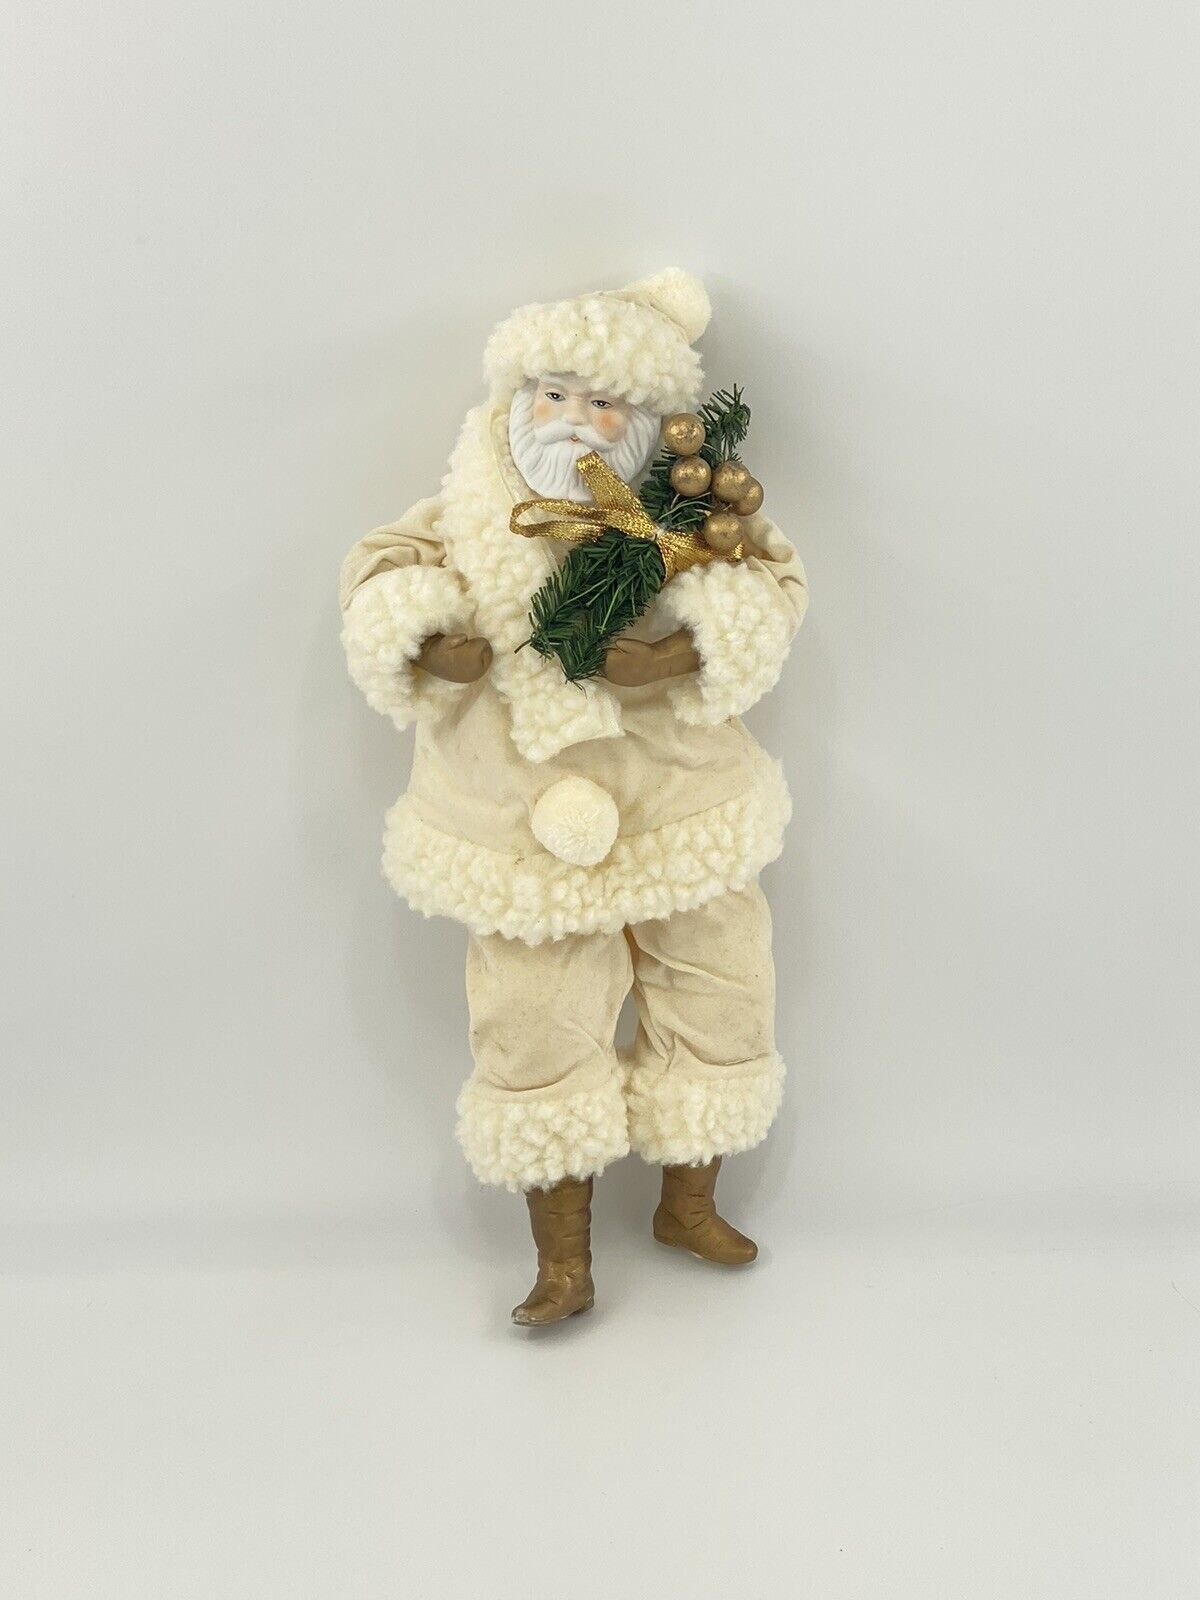 Village Art 16 Inch Santa In Cream Colored & White Suit Holding Holly